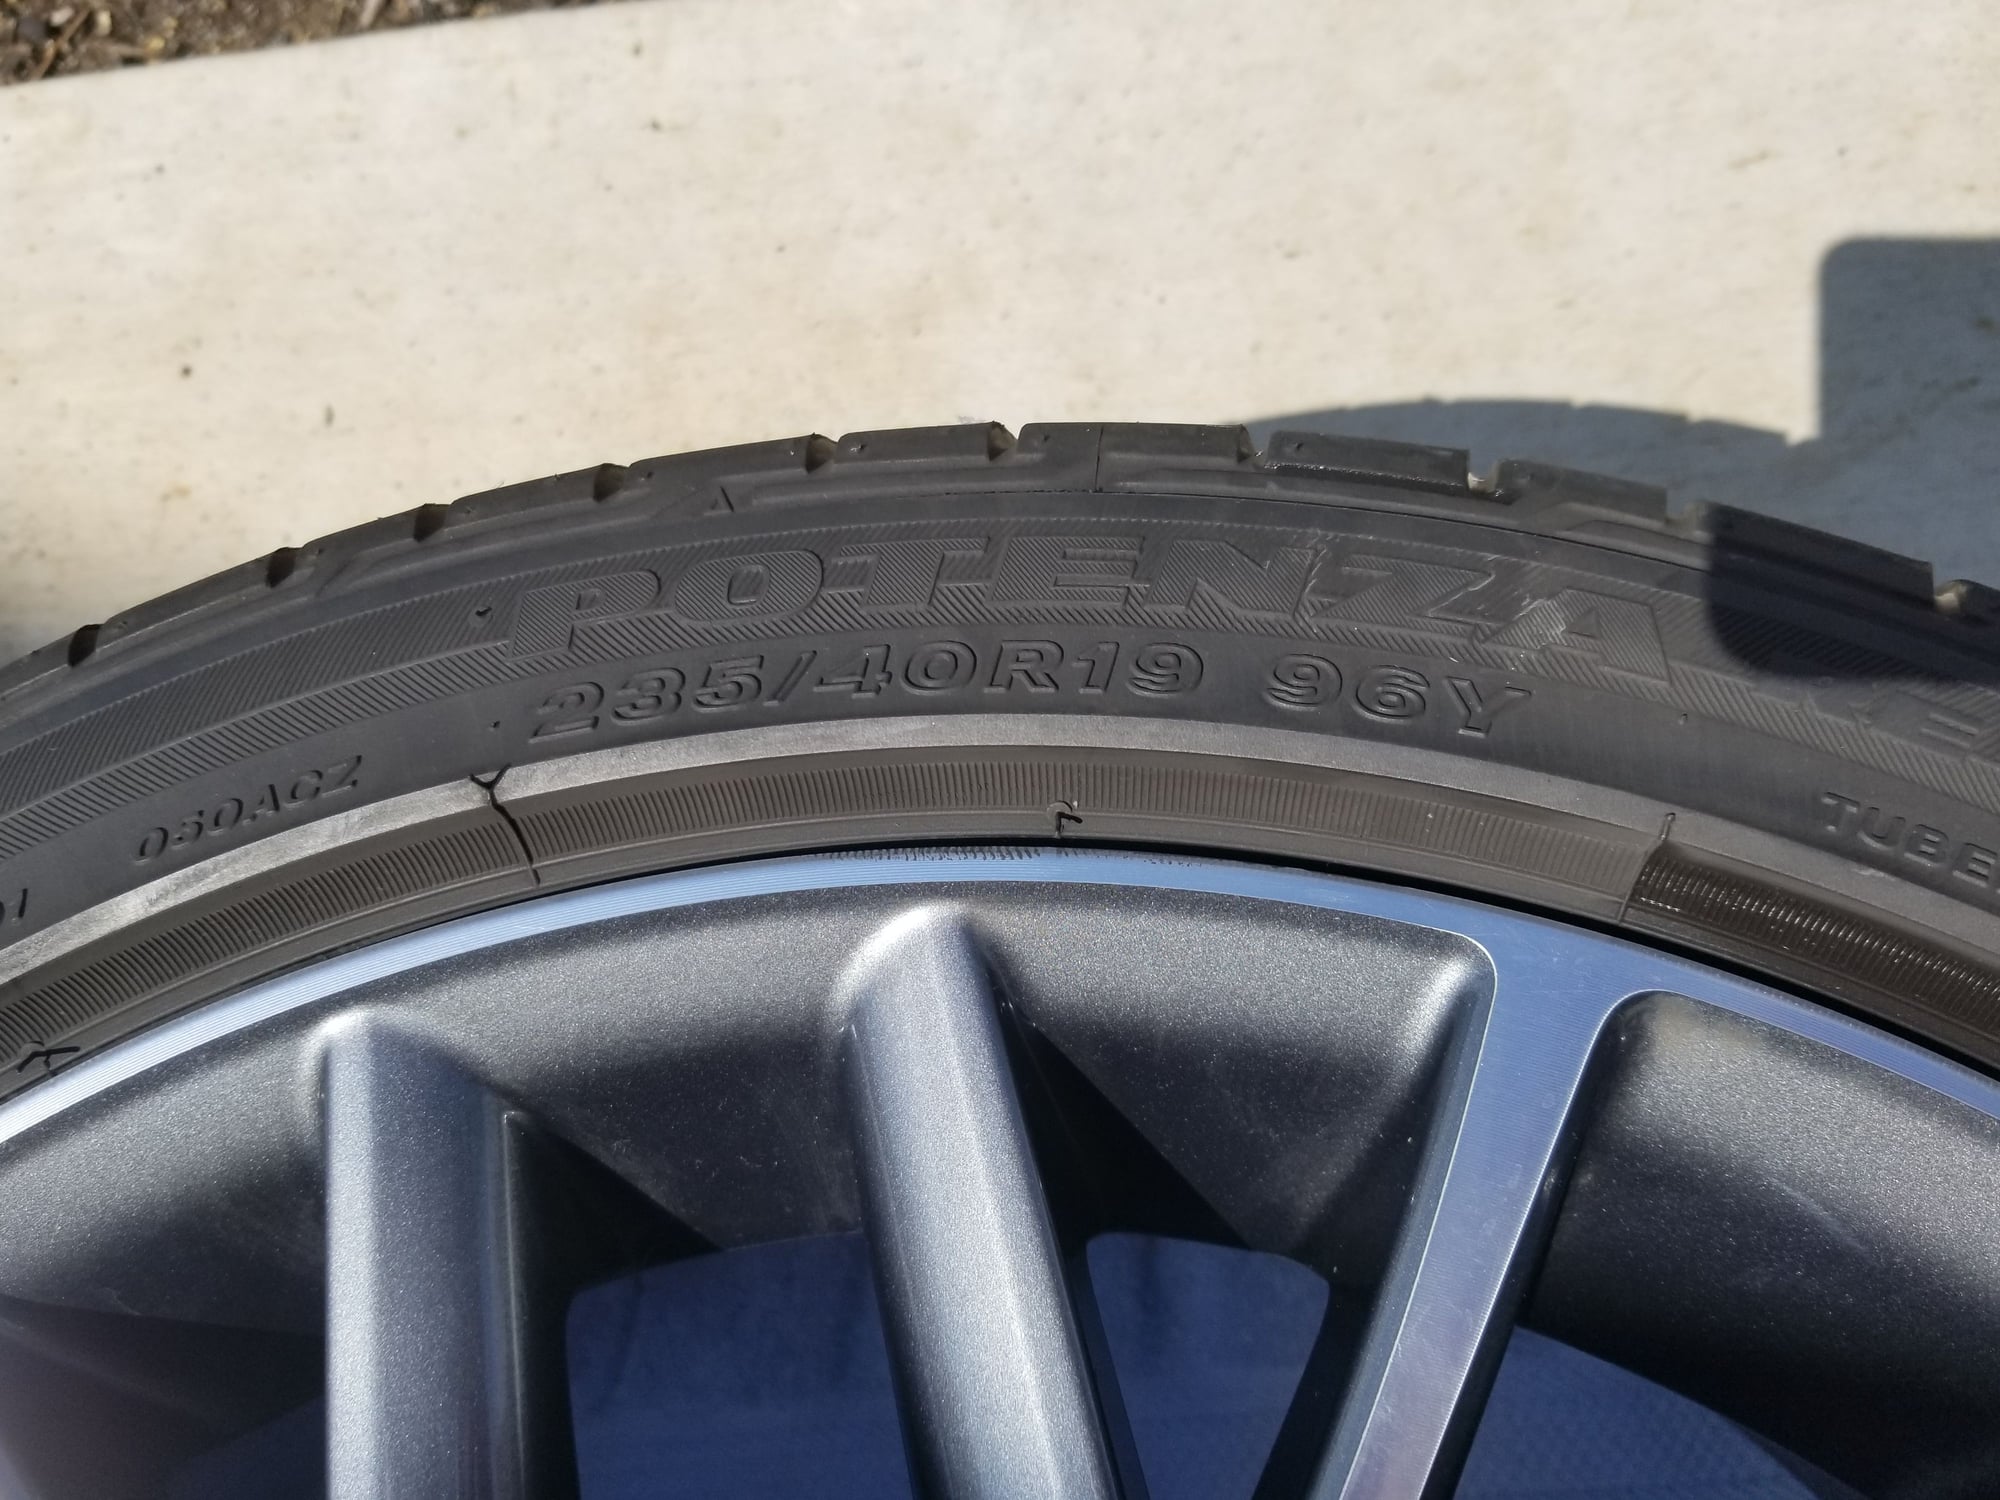 Wheels and Tires/Axles - Factory Lexus RC wheels and tires - Excellent condition - Used - 2015 to 2018 Lexus RC350 - 2016 to 2018 Lexus RC300 - 2016 to 2018 Lexus RC200t - Argyle, TX 76226, United States